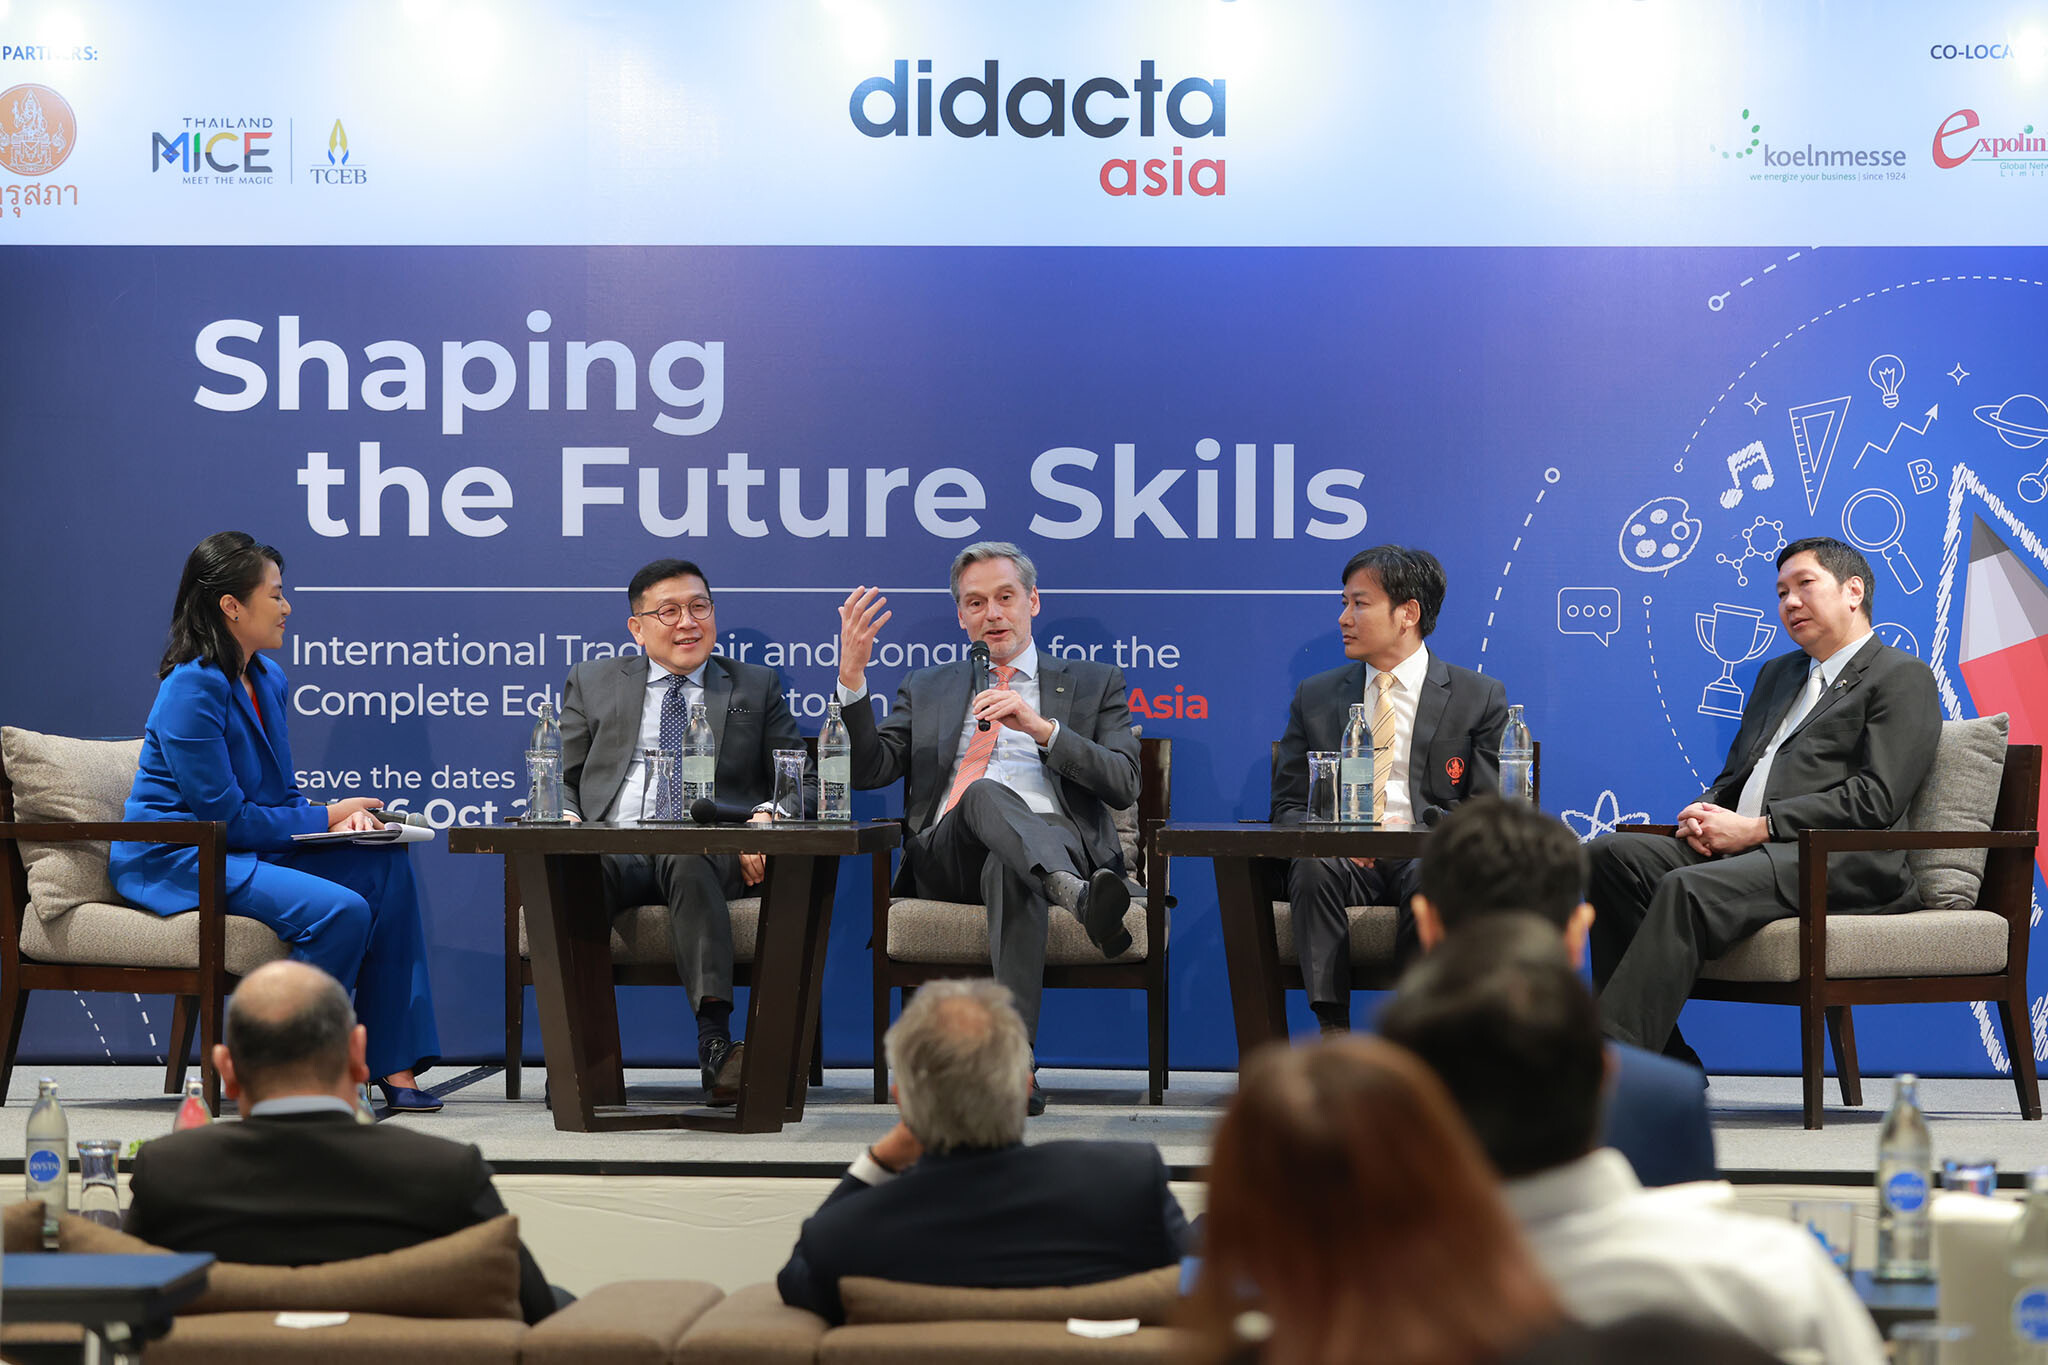 didacta asia — The International Trade Fair and Congress for the Complete Education Sector in Southeast Asia